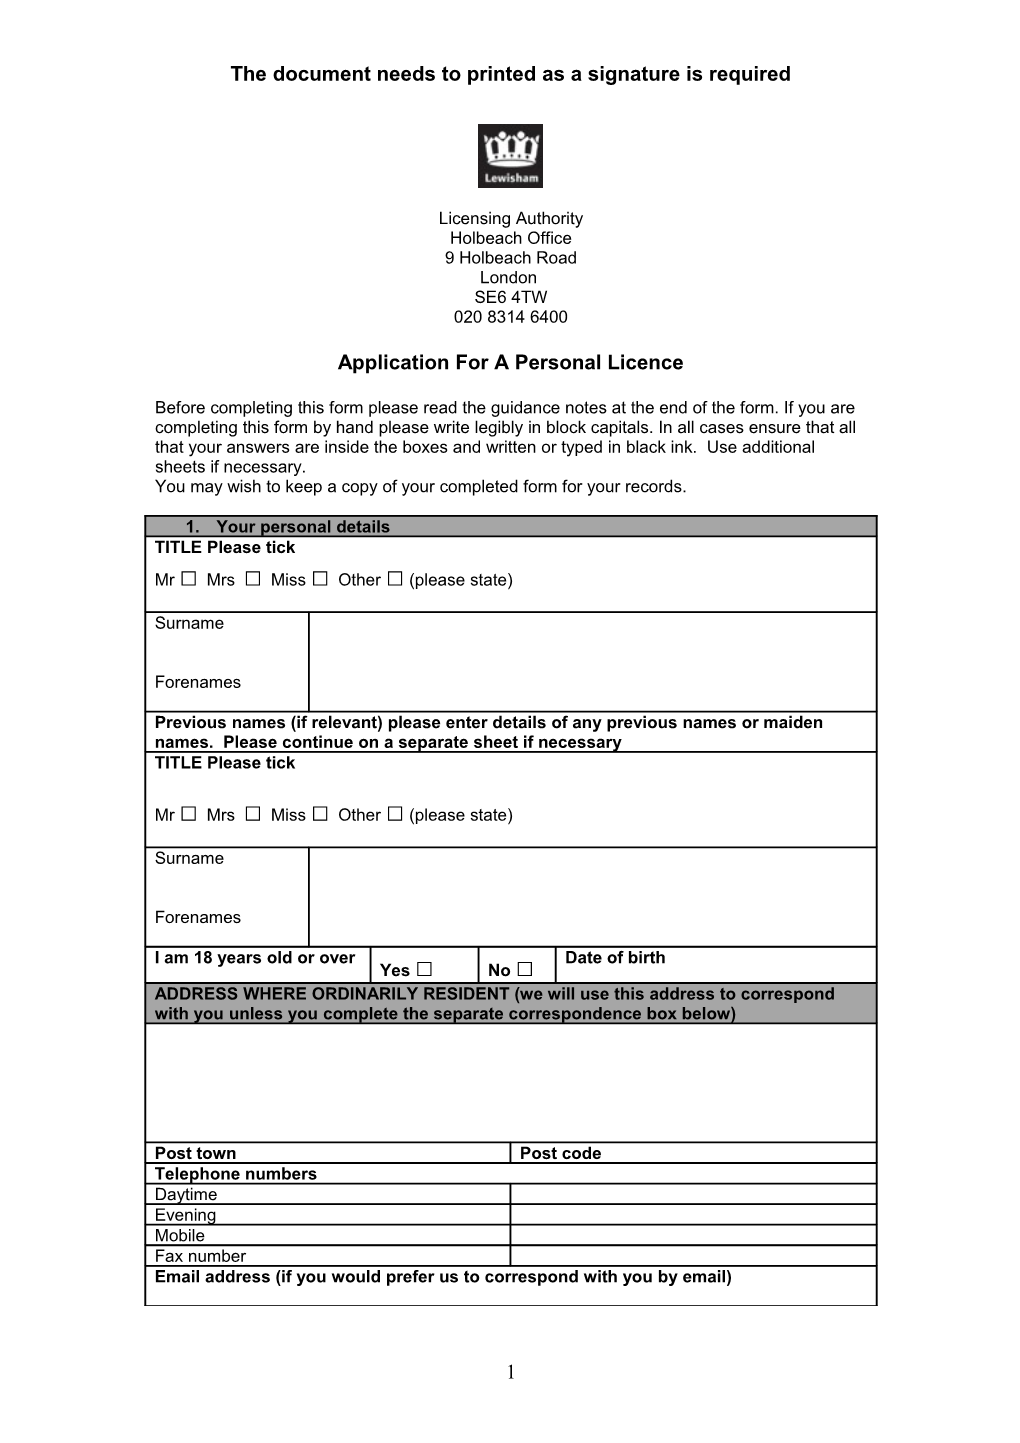 Application for Personal Licence